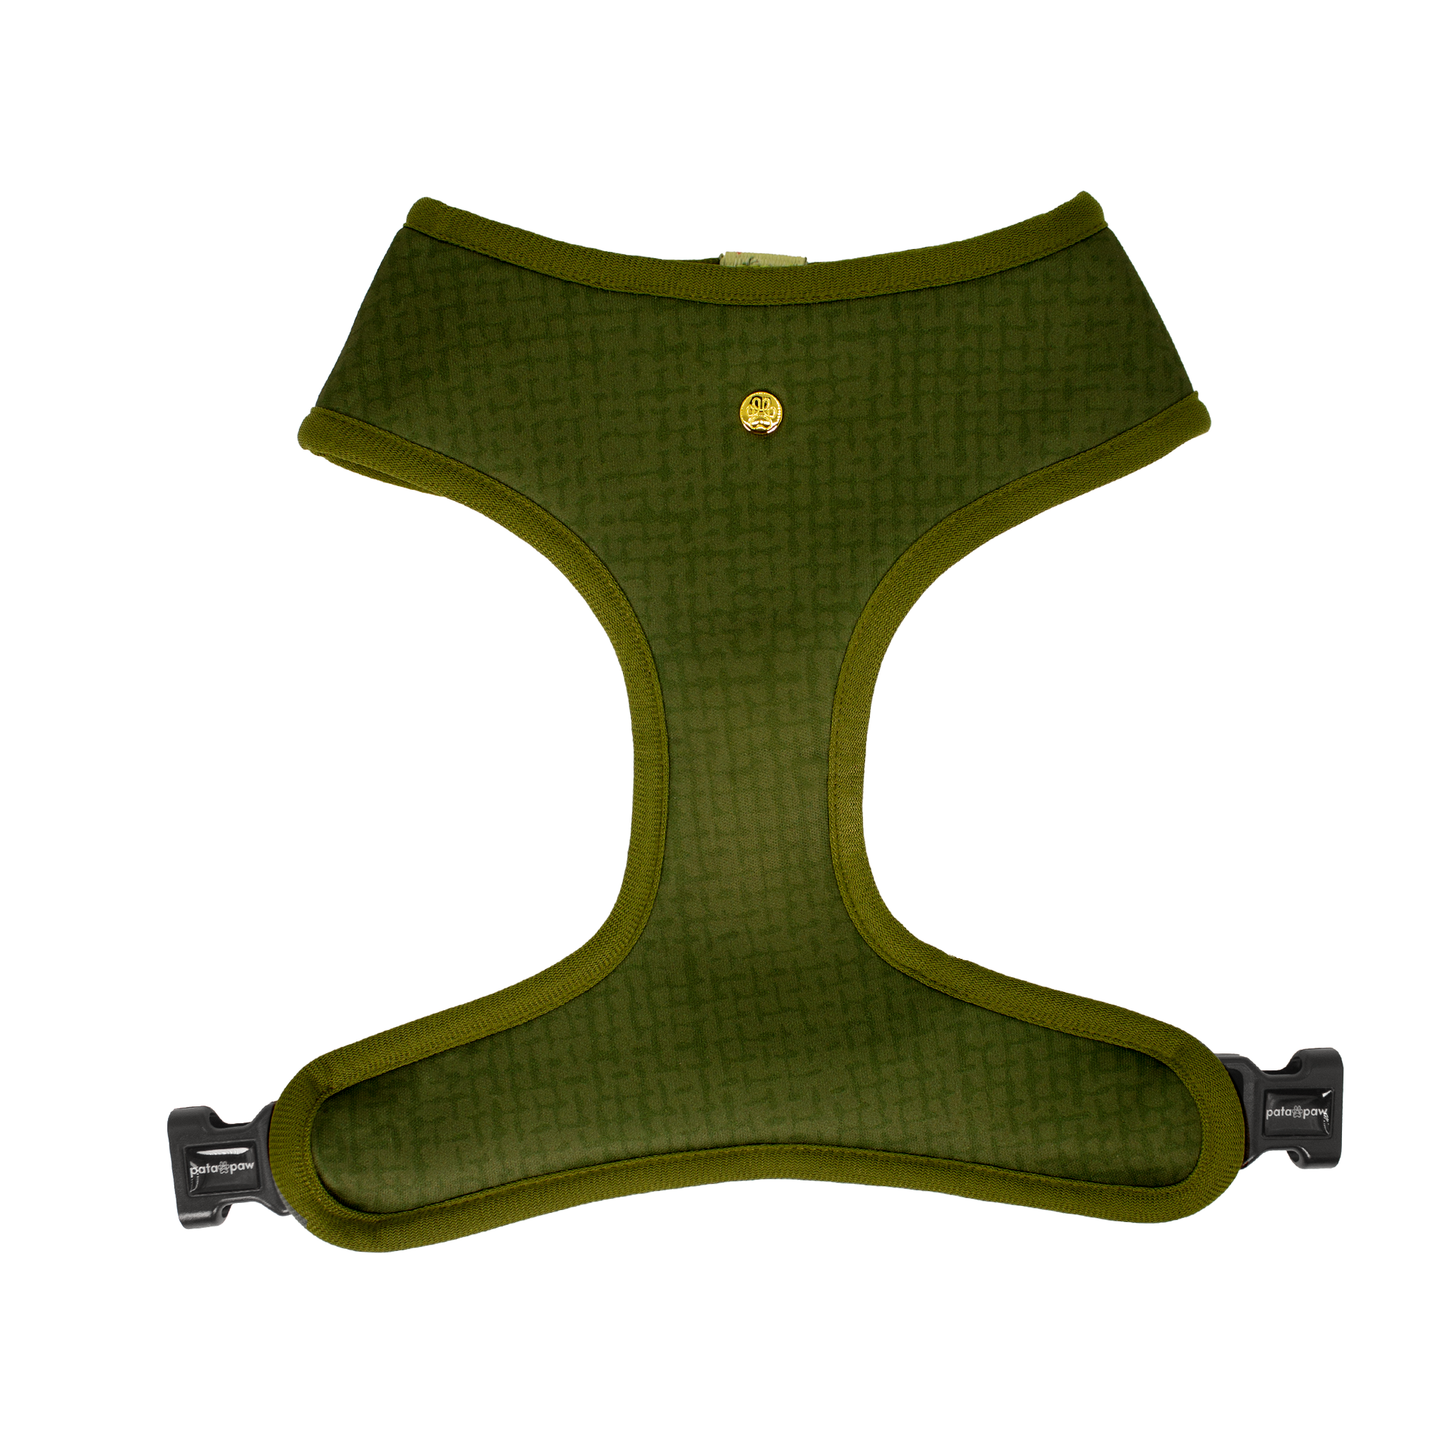 Pata Paw alpine wildflowers reversible harness showing a timeless and chic texture pattern in olive green.